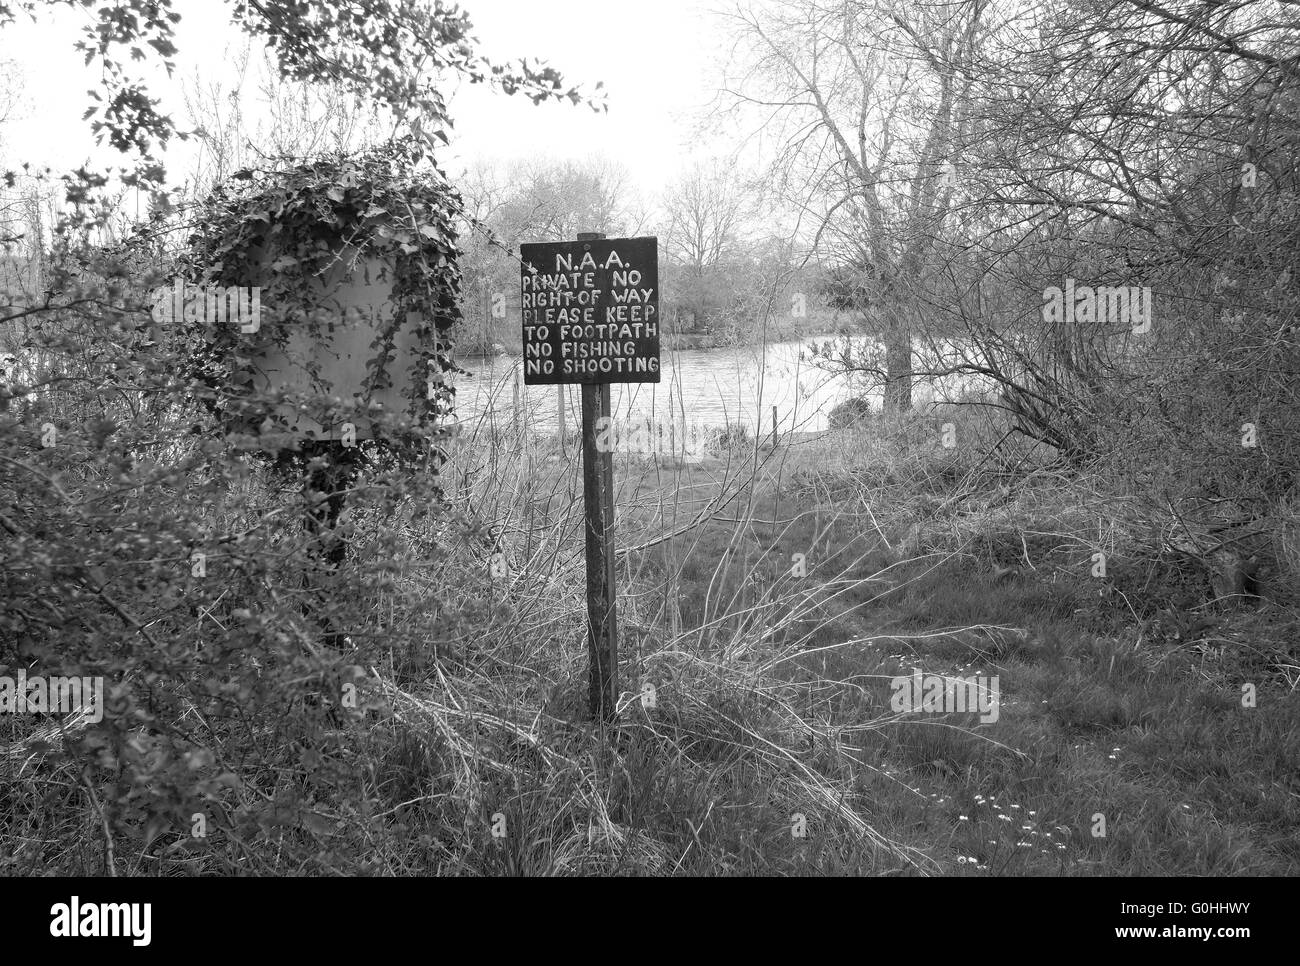 Sign for private no right of way, no fishing, no shooting, April 2016 Stock Photo